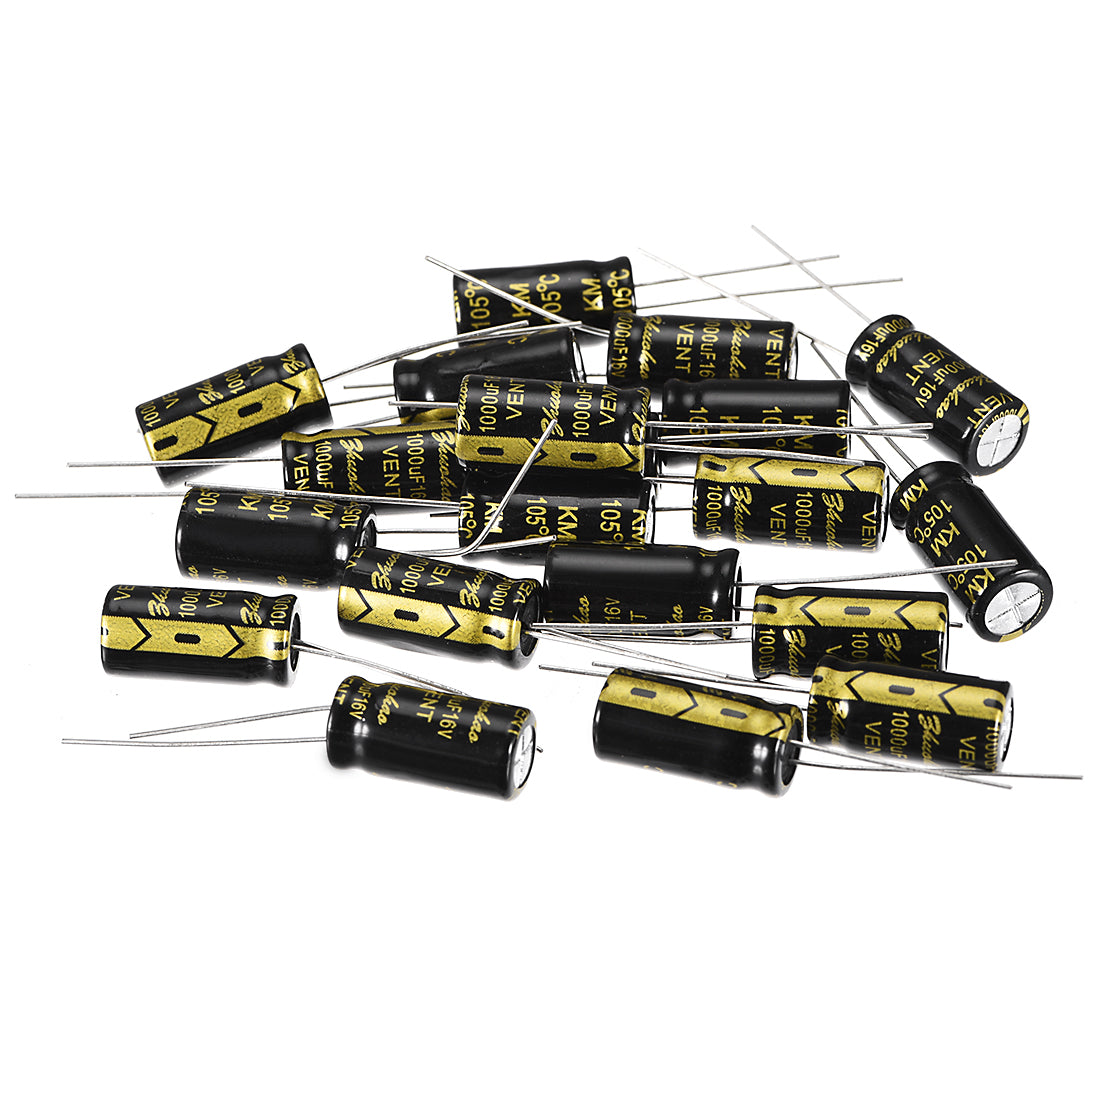 uxcell Uxcell Aluminum Radial Electrolytic Capacitor with 1000uF 16V 105 Celsius Life 2000H 8 x 16 mm Black 20pcs